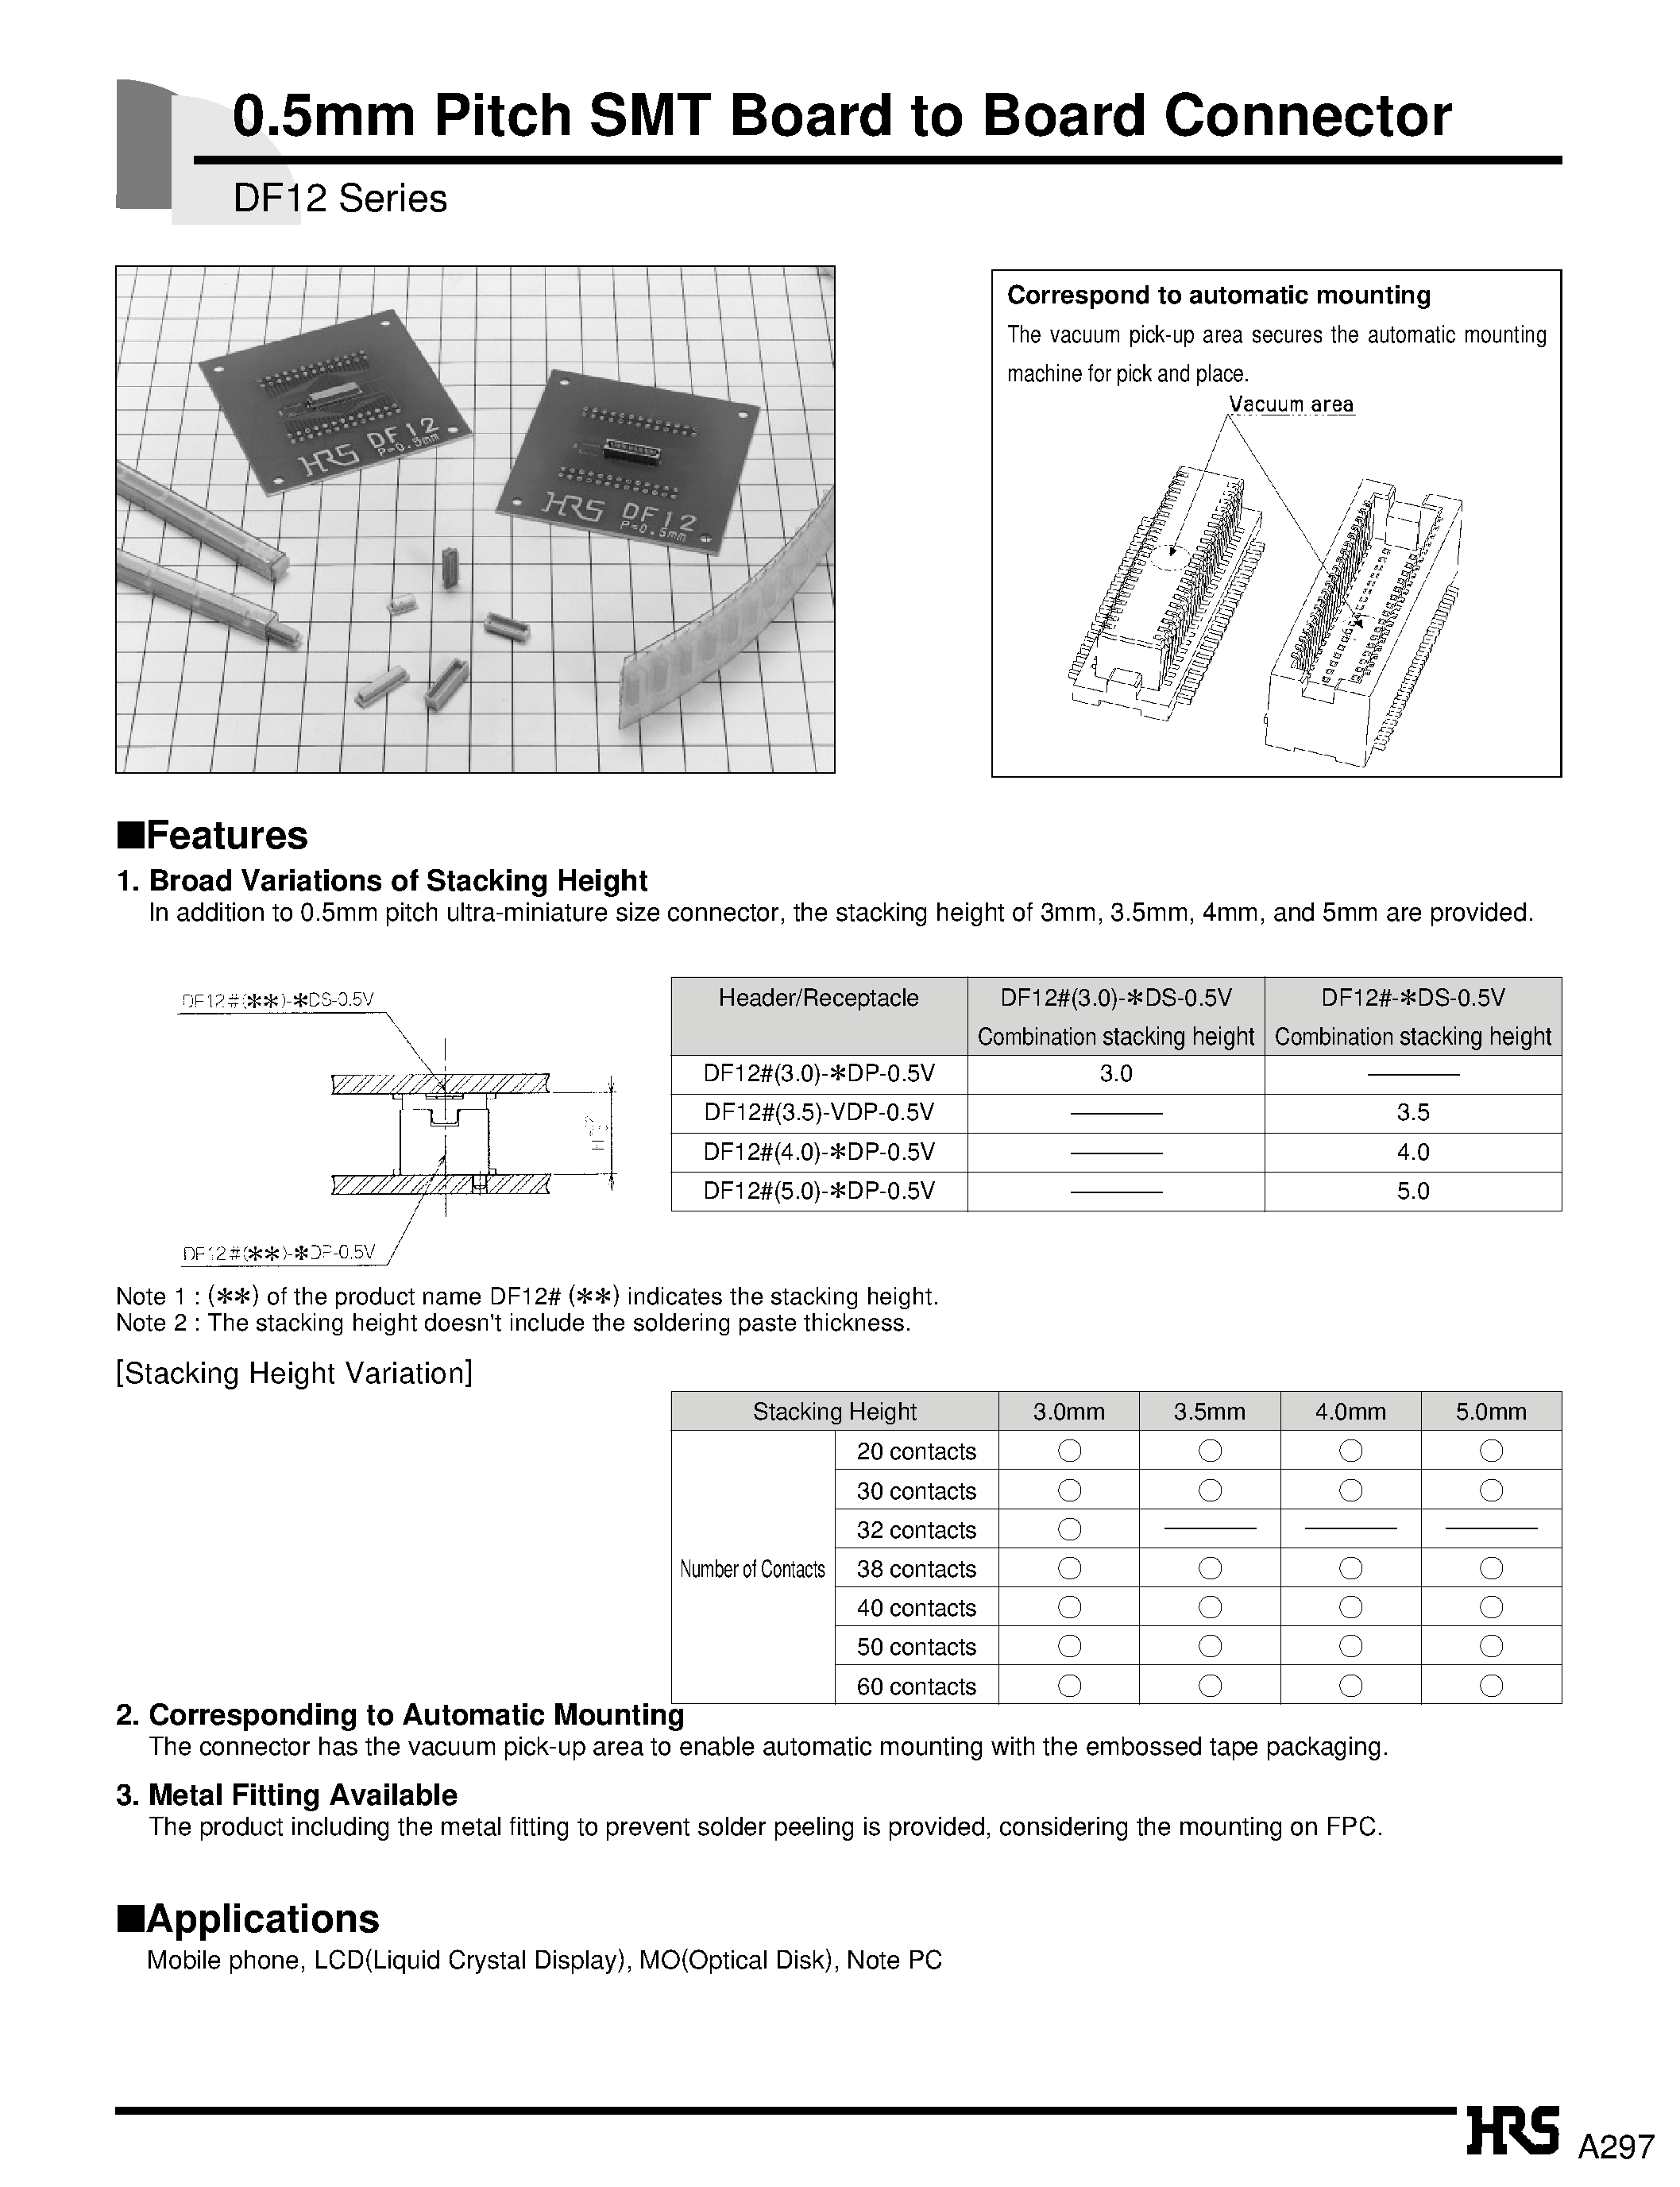 Datasheet DF12A-30DP-0.5V - 0.5mm Pitch SMT Board to Board Connector page 1